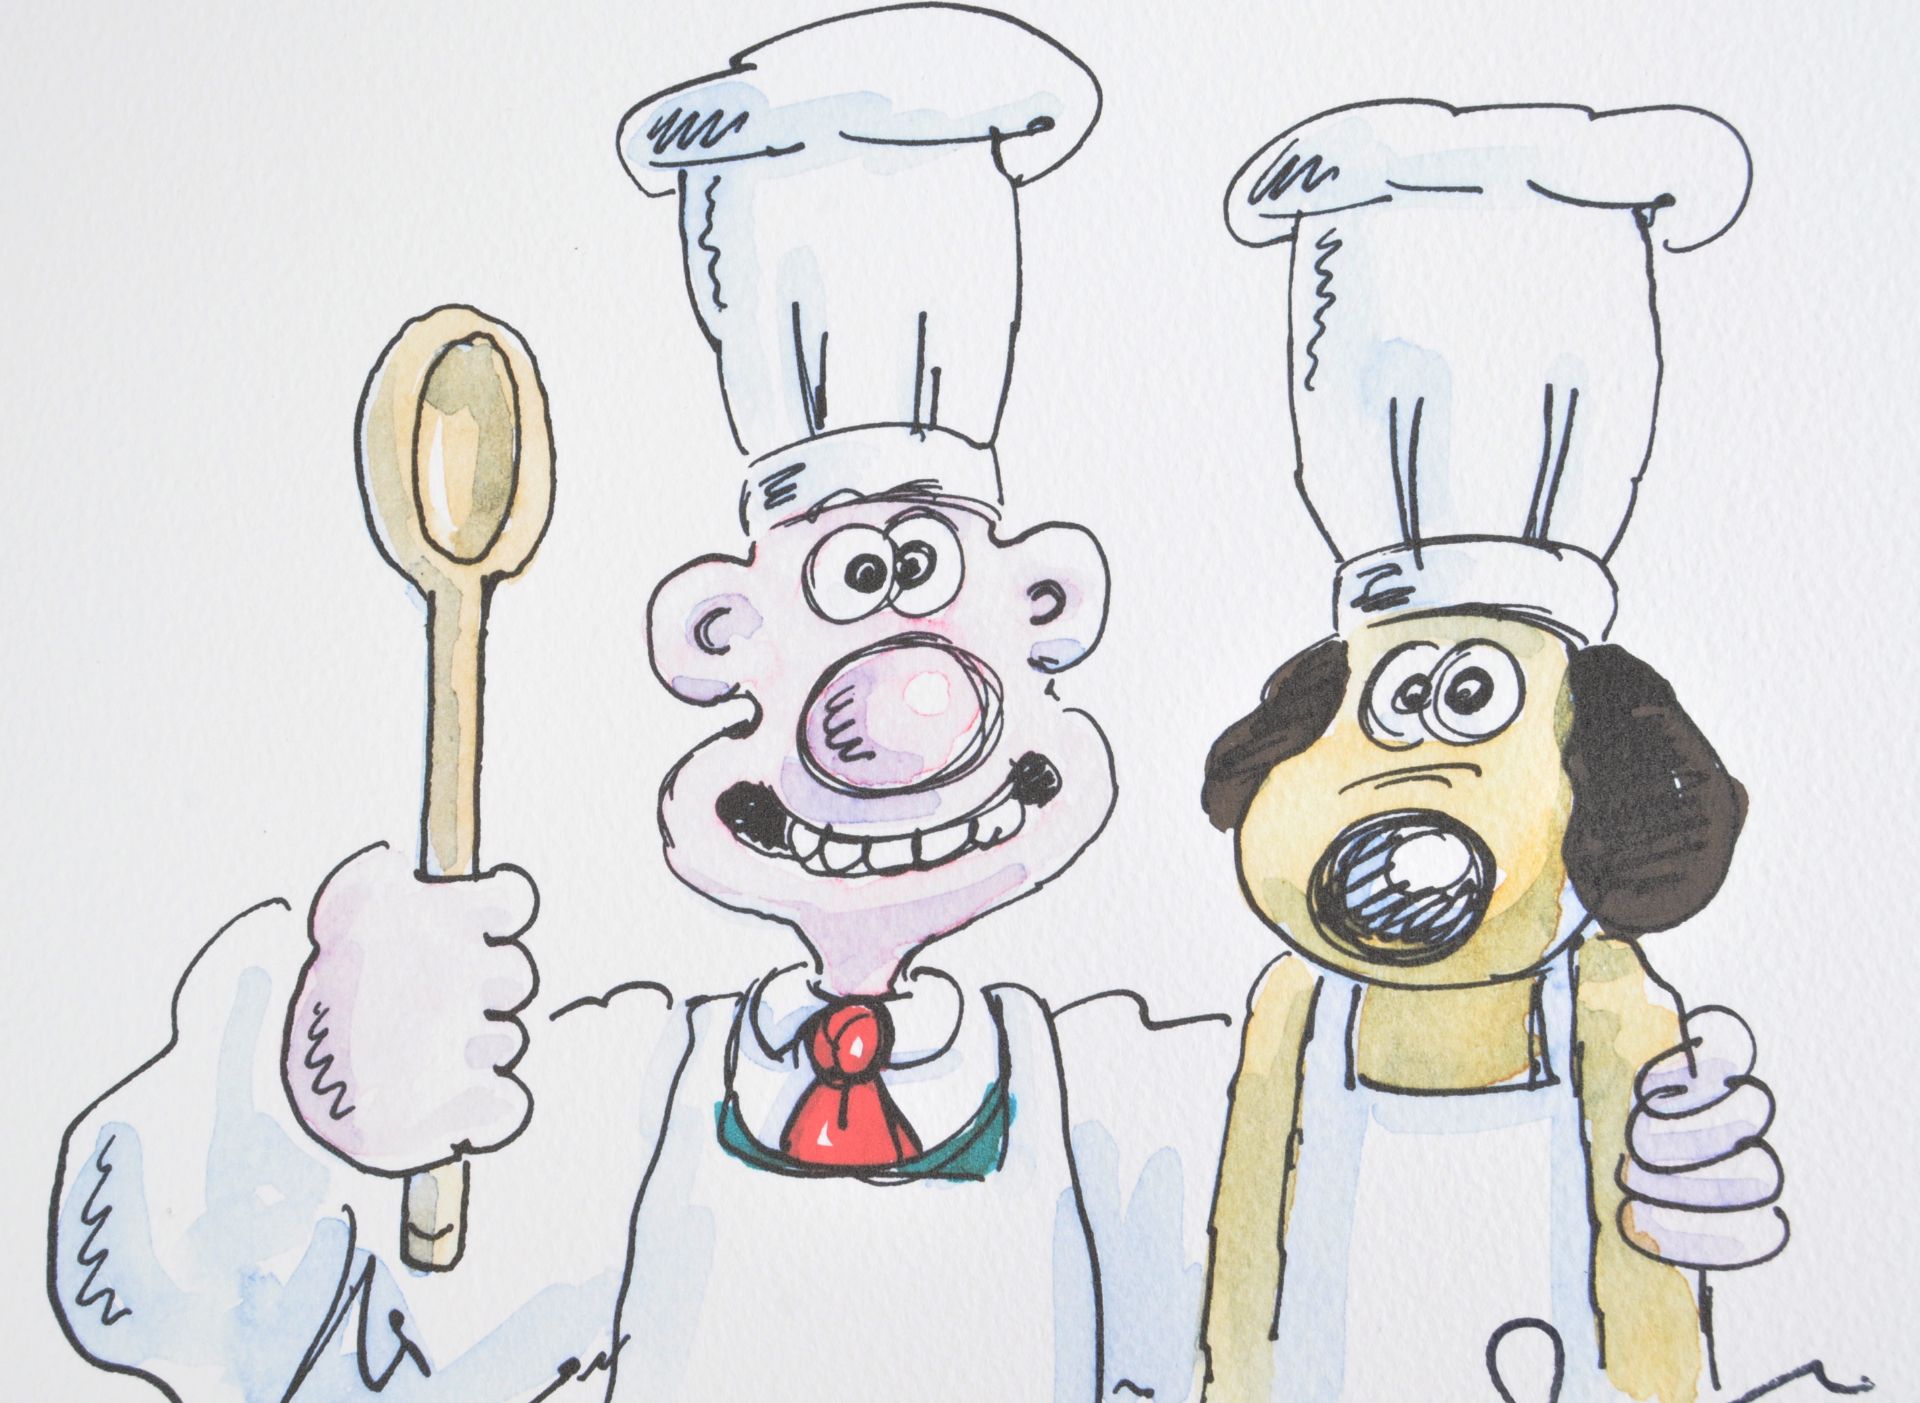 AARDMAN ANIMATIONS - WALLACE & GROMIT - NICK PARK SIGNED ARTWORK - Image 2 of 3